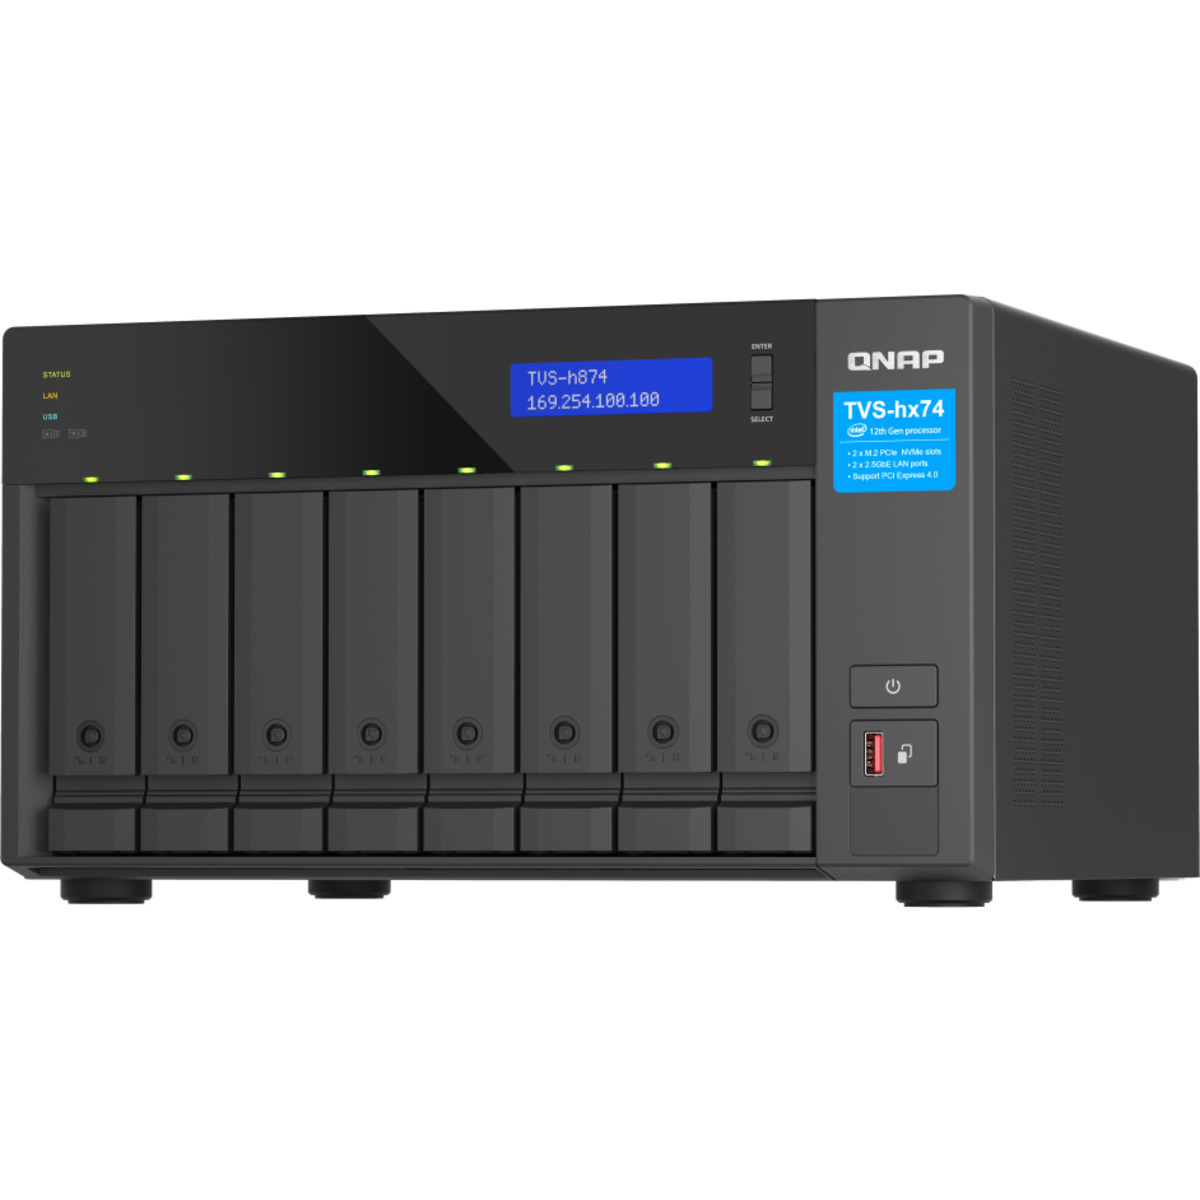 buy QNAP TVS-h874 Core i7 32tb Desktop NAS - Network Attached Storage Device 8x4000gb Seagate BarraCuda ST4000DM004 3.5 7200rpm SATA 6Gb/s HDD CONSUMER Class Drives Installed - Burn-In Tested - nas headquarters buy network attached storage server device das new raid-5 free shipping usa spring sale TVS-h874 Core i7